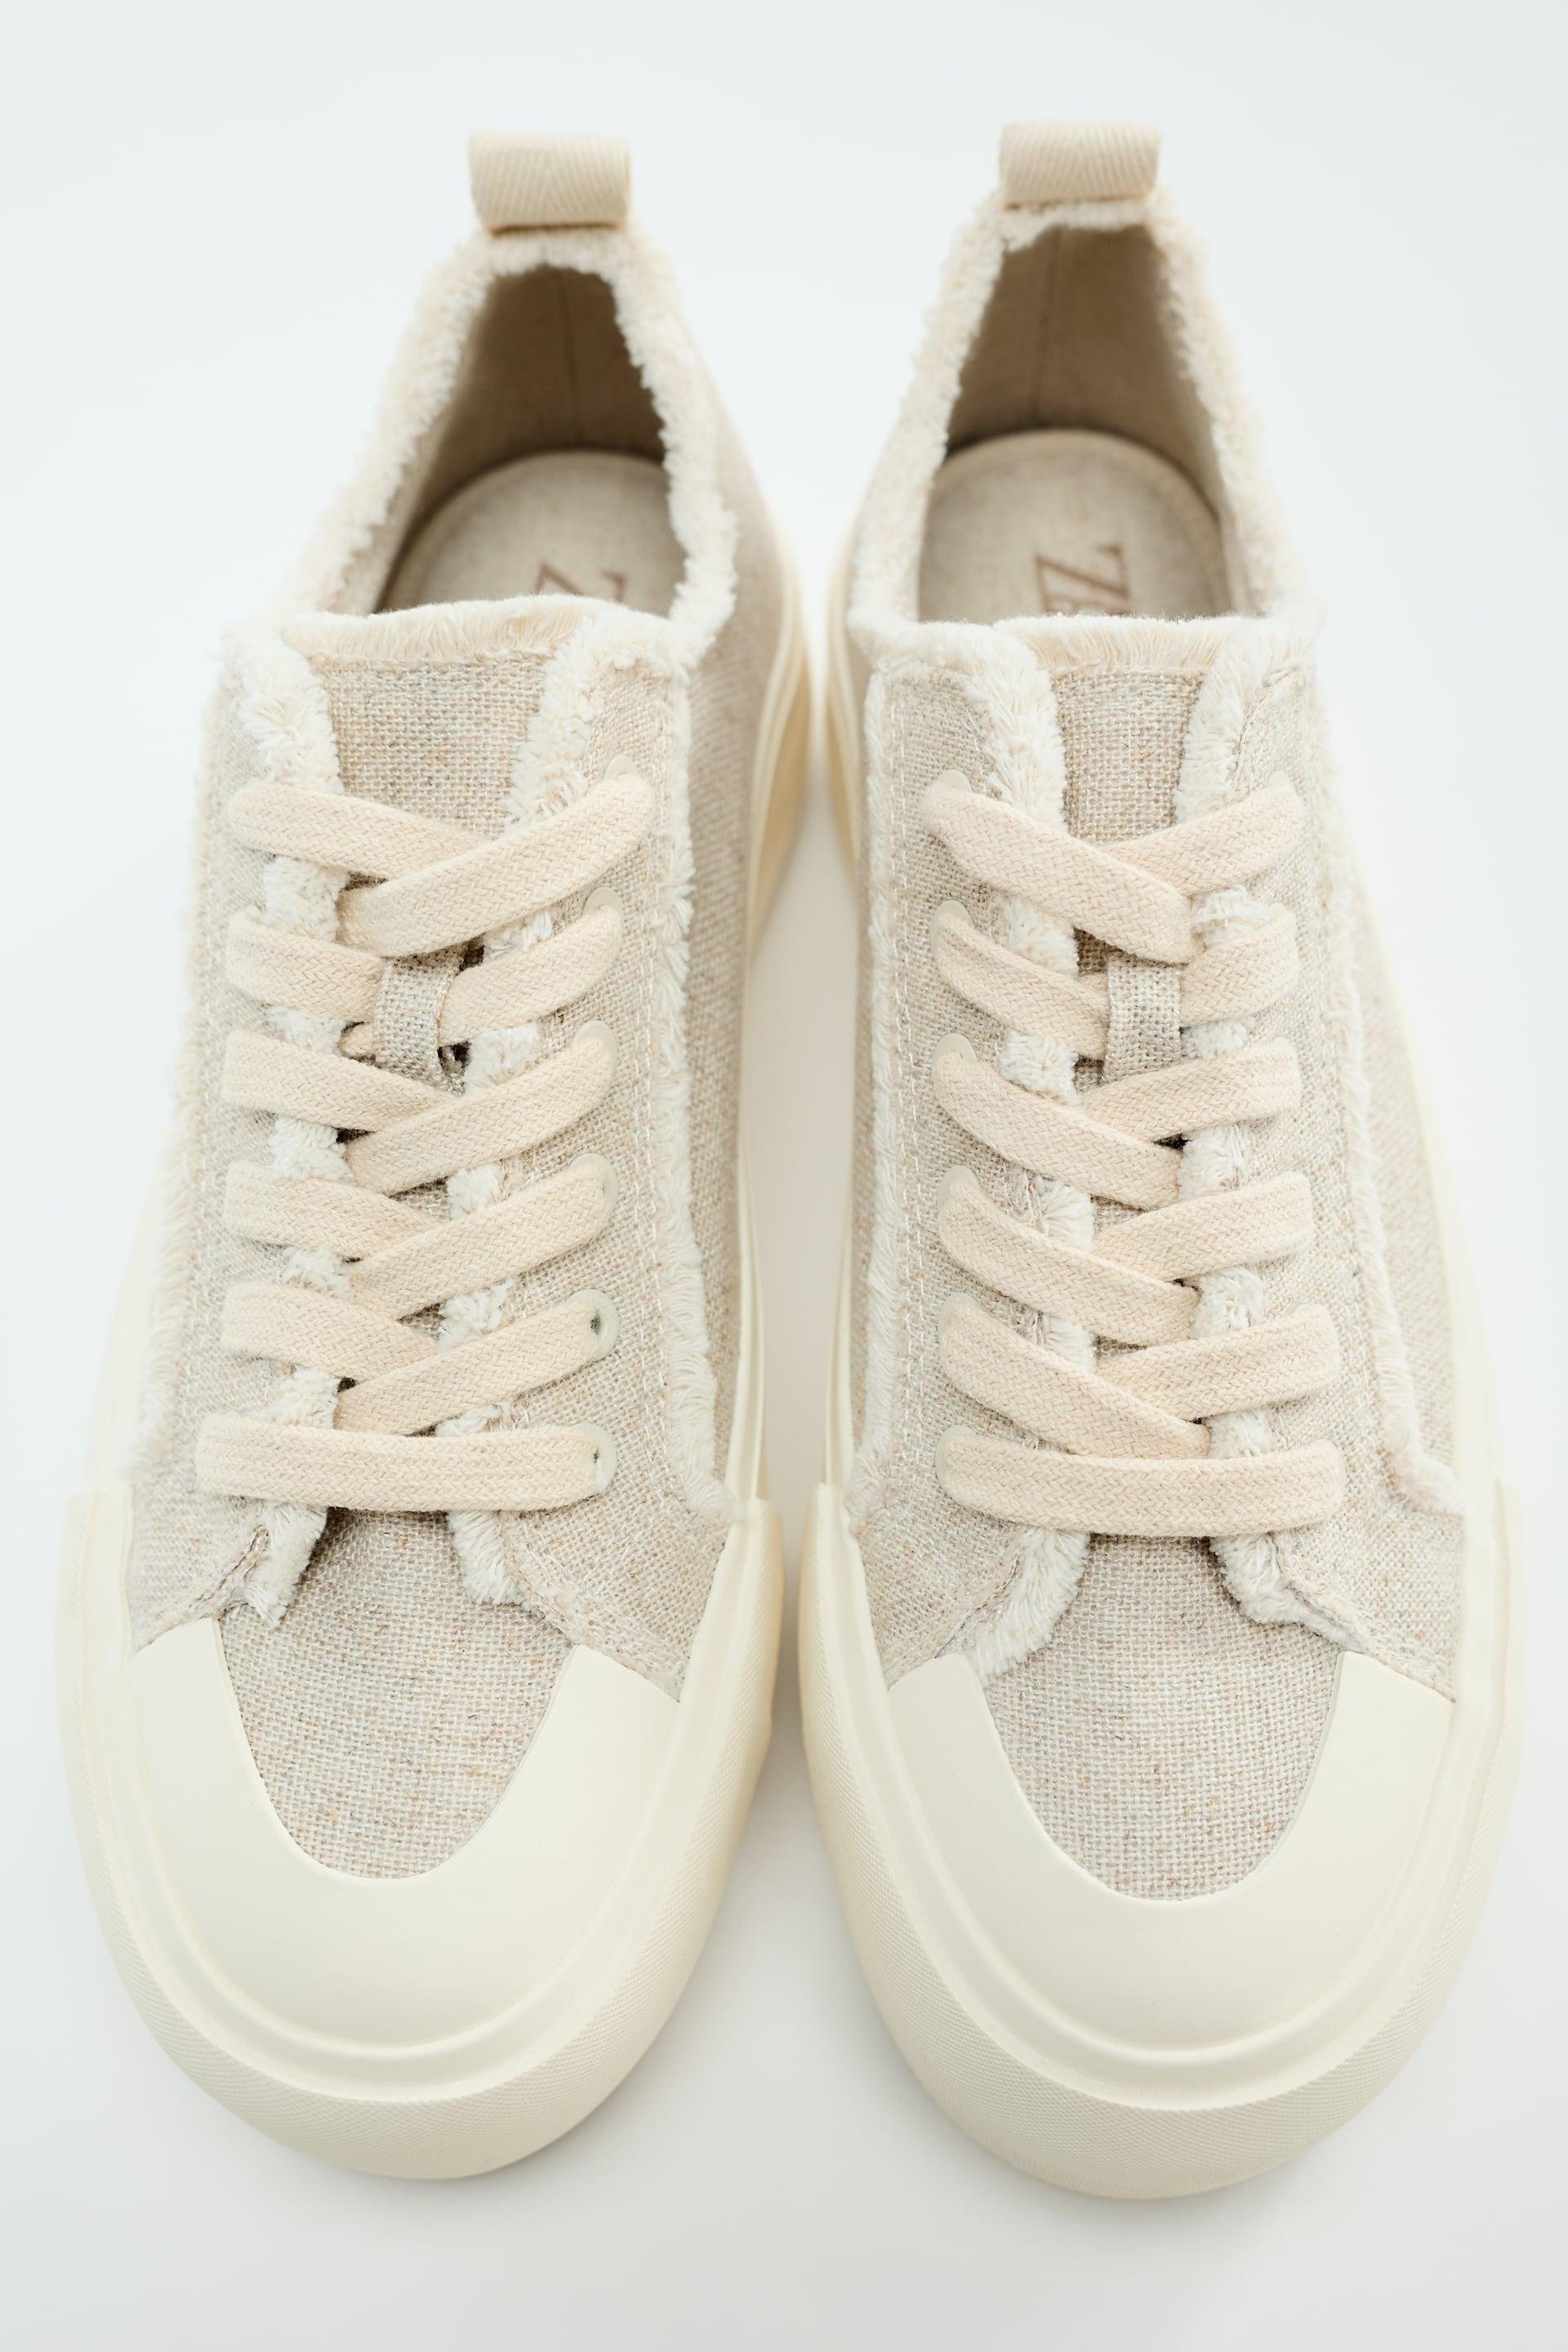 FRAYED FABRIC SNEAKERS by ZARA